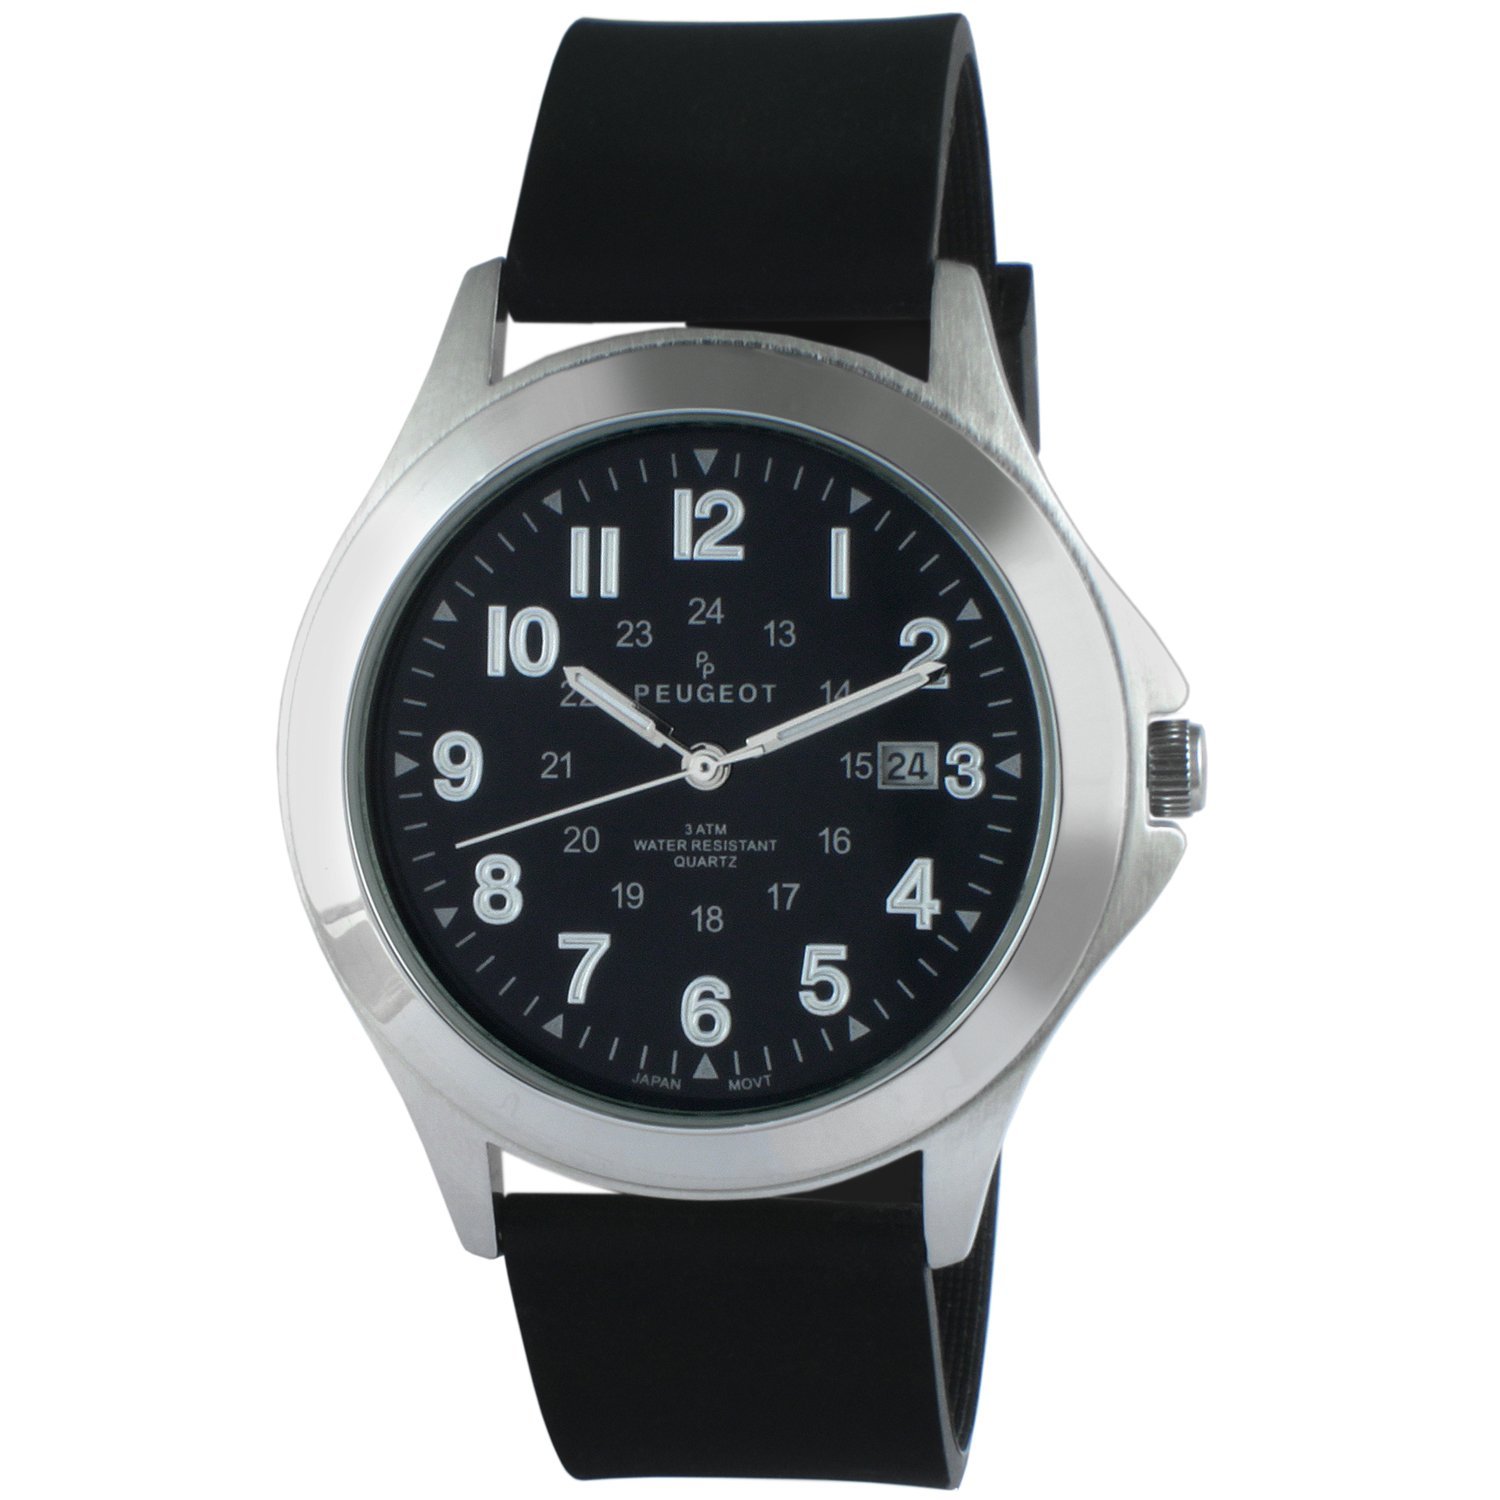 PP Peugeot Men Army Military Style Quartz Weekender Watch with 24-Hour Time & Stainless Steel Bracelet